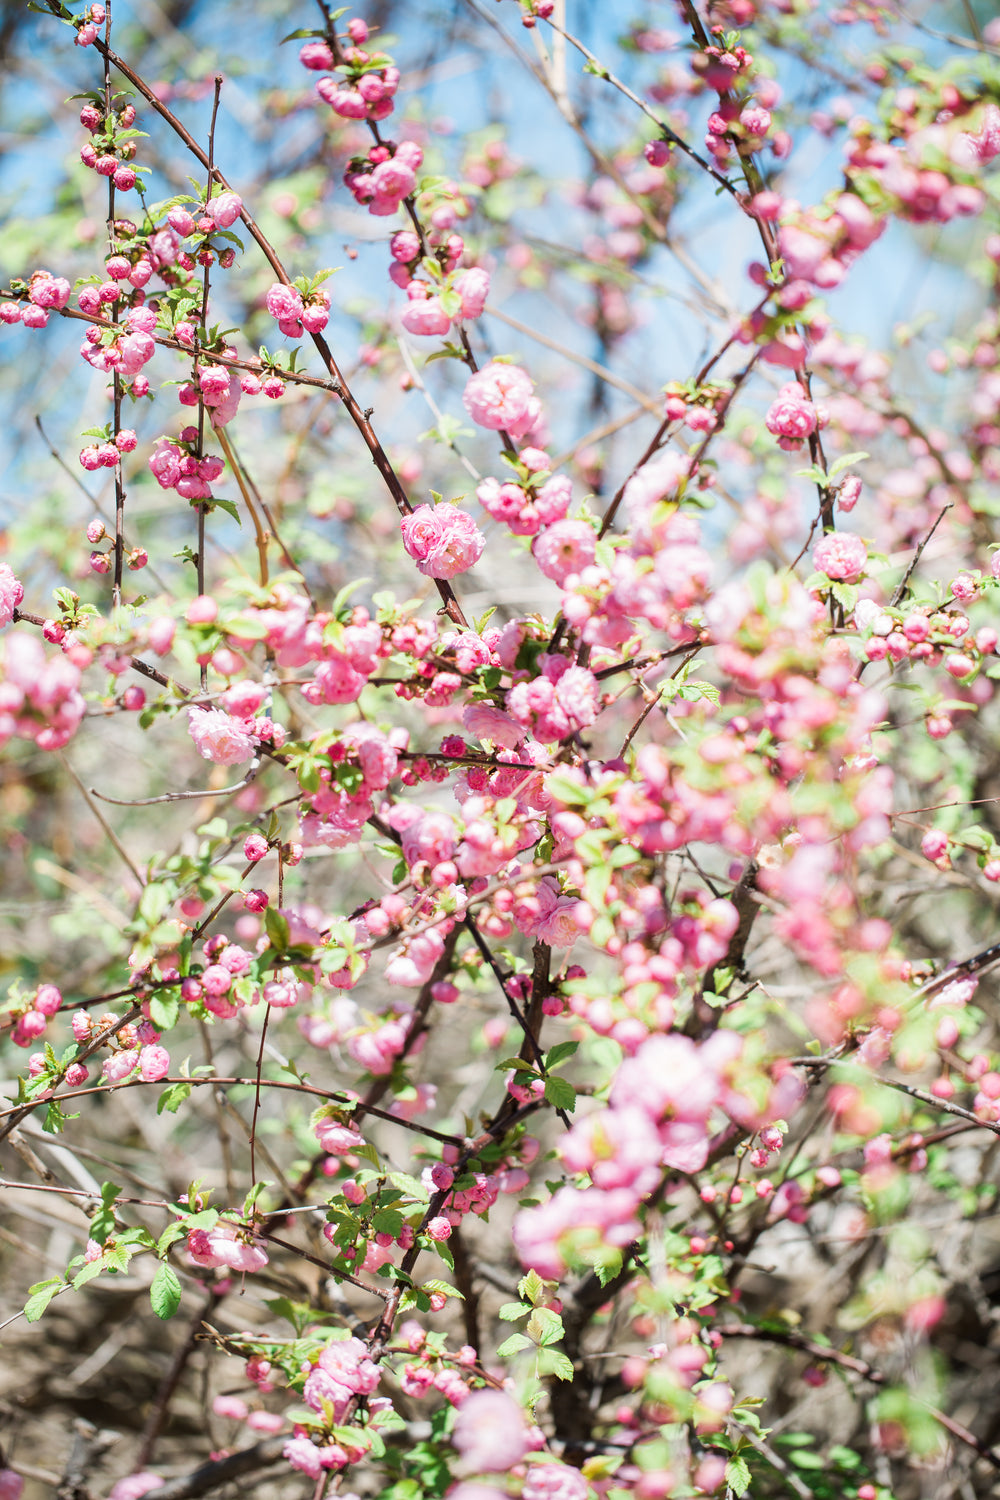 pink flowers blooming on tree branches